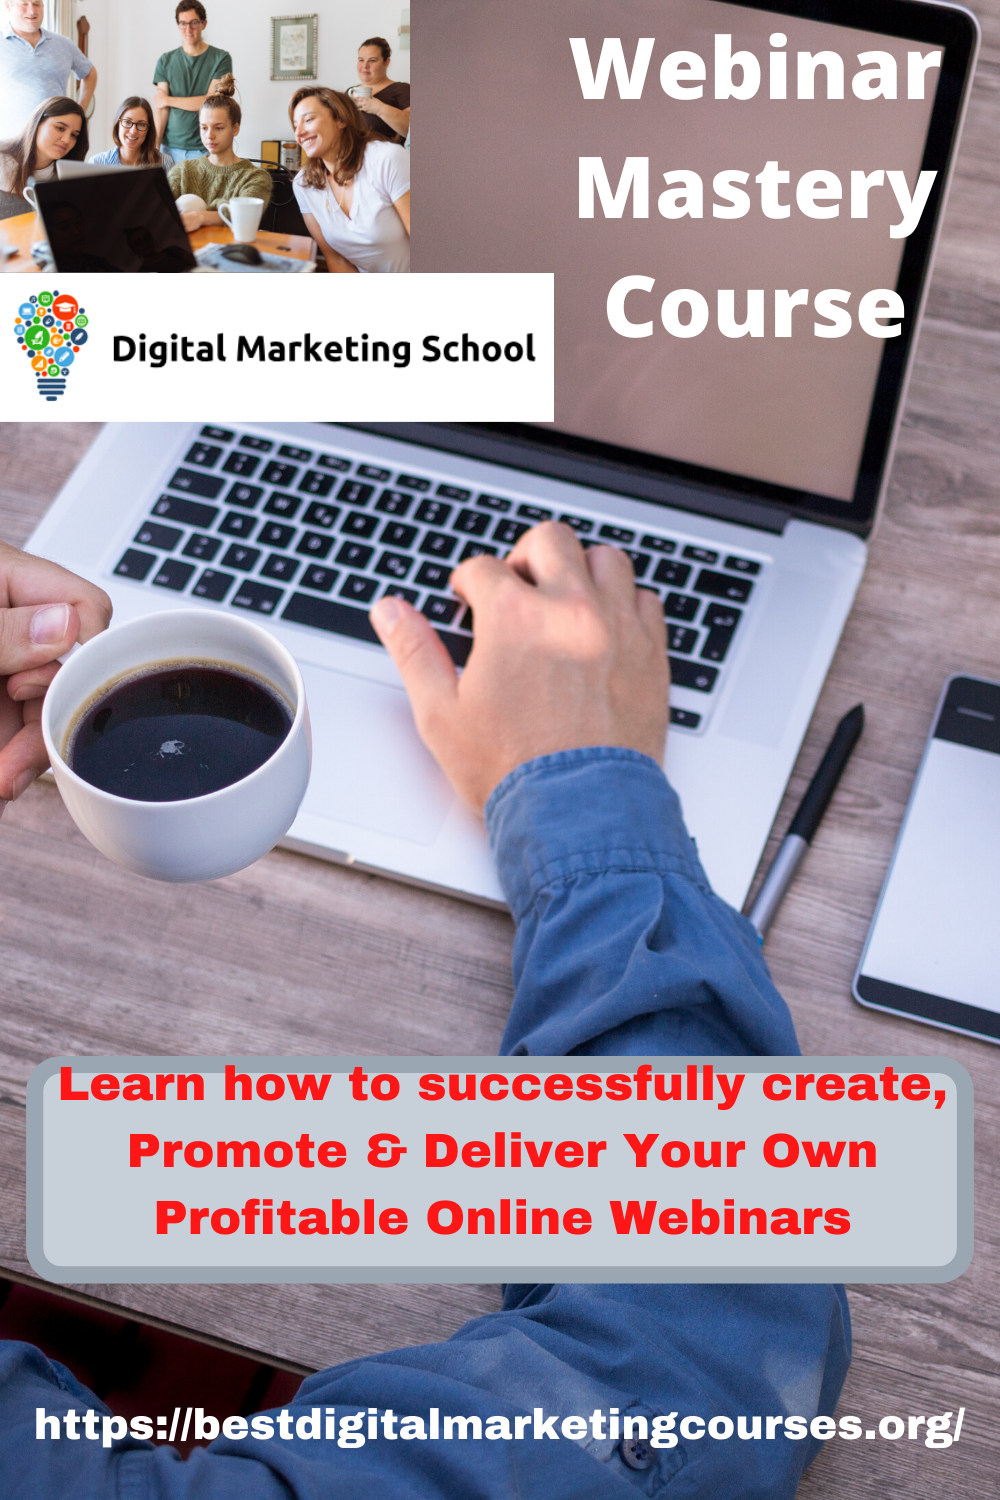 How To Successfully Create, Promote & Deliver Your Own Webinars!